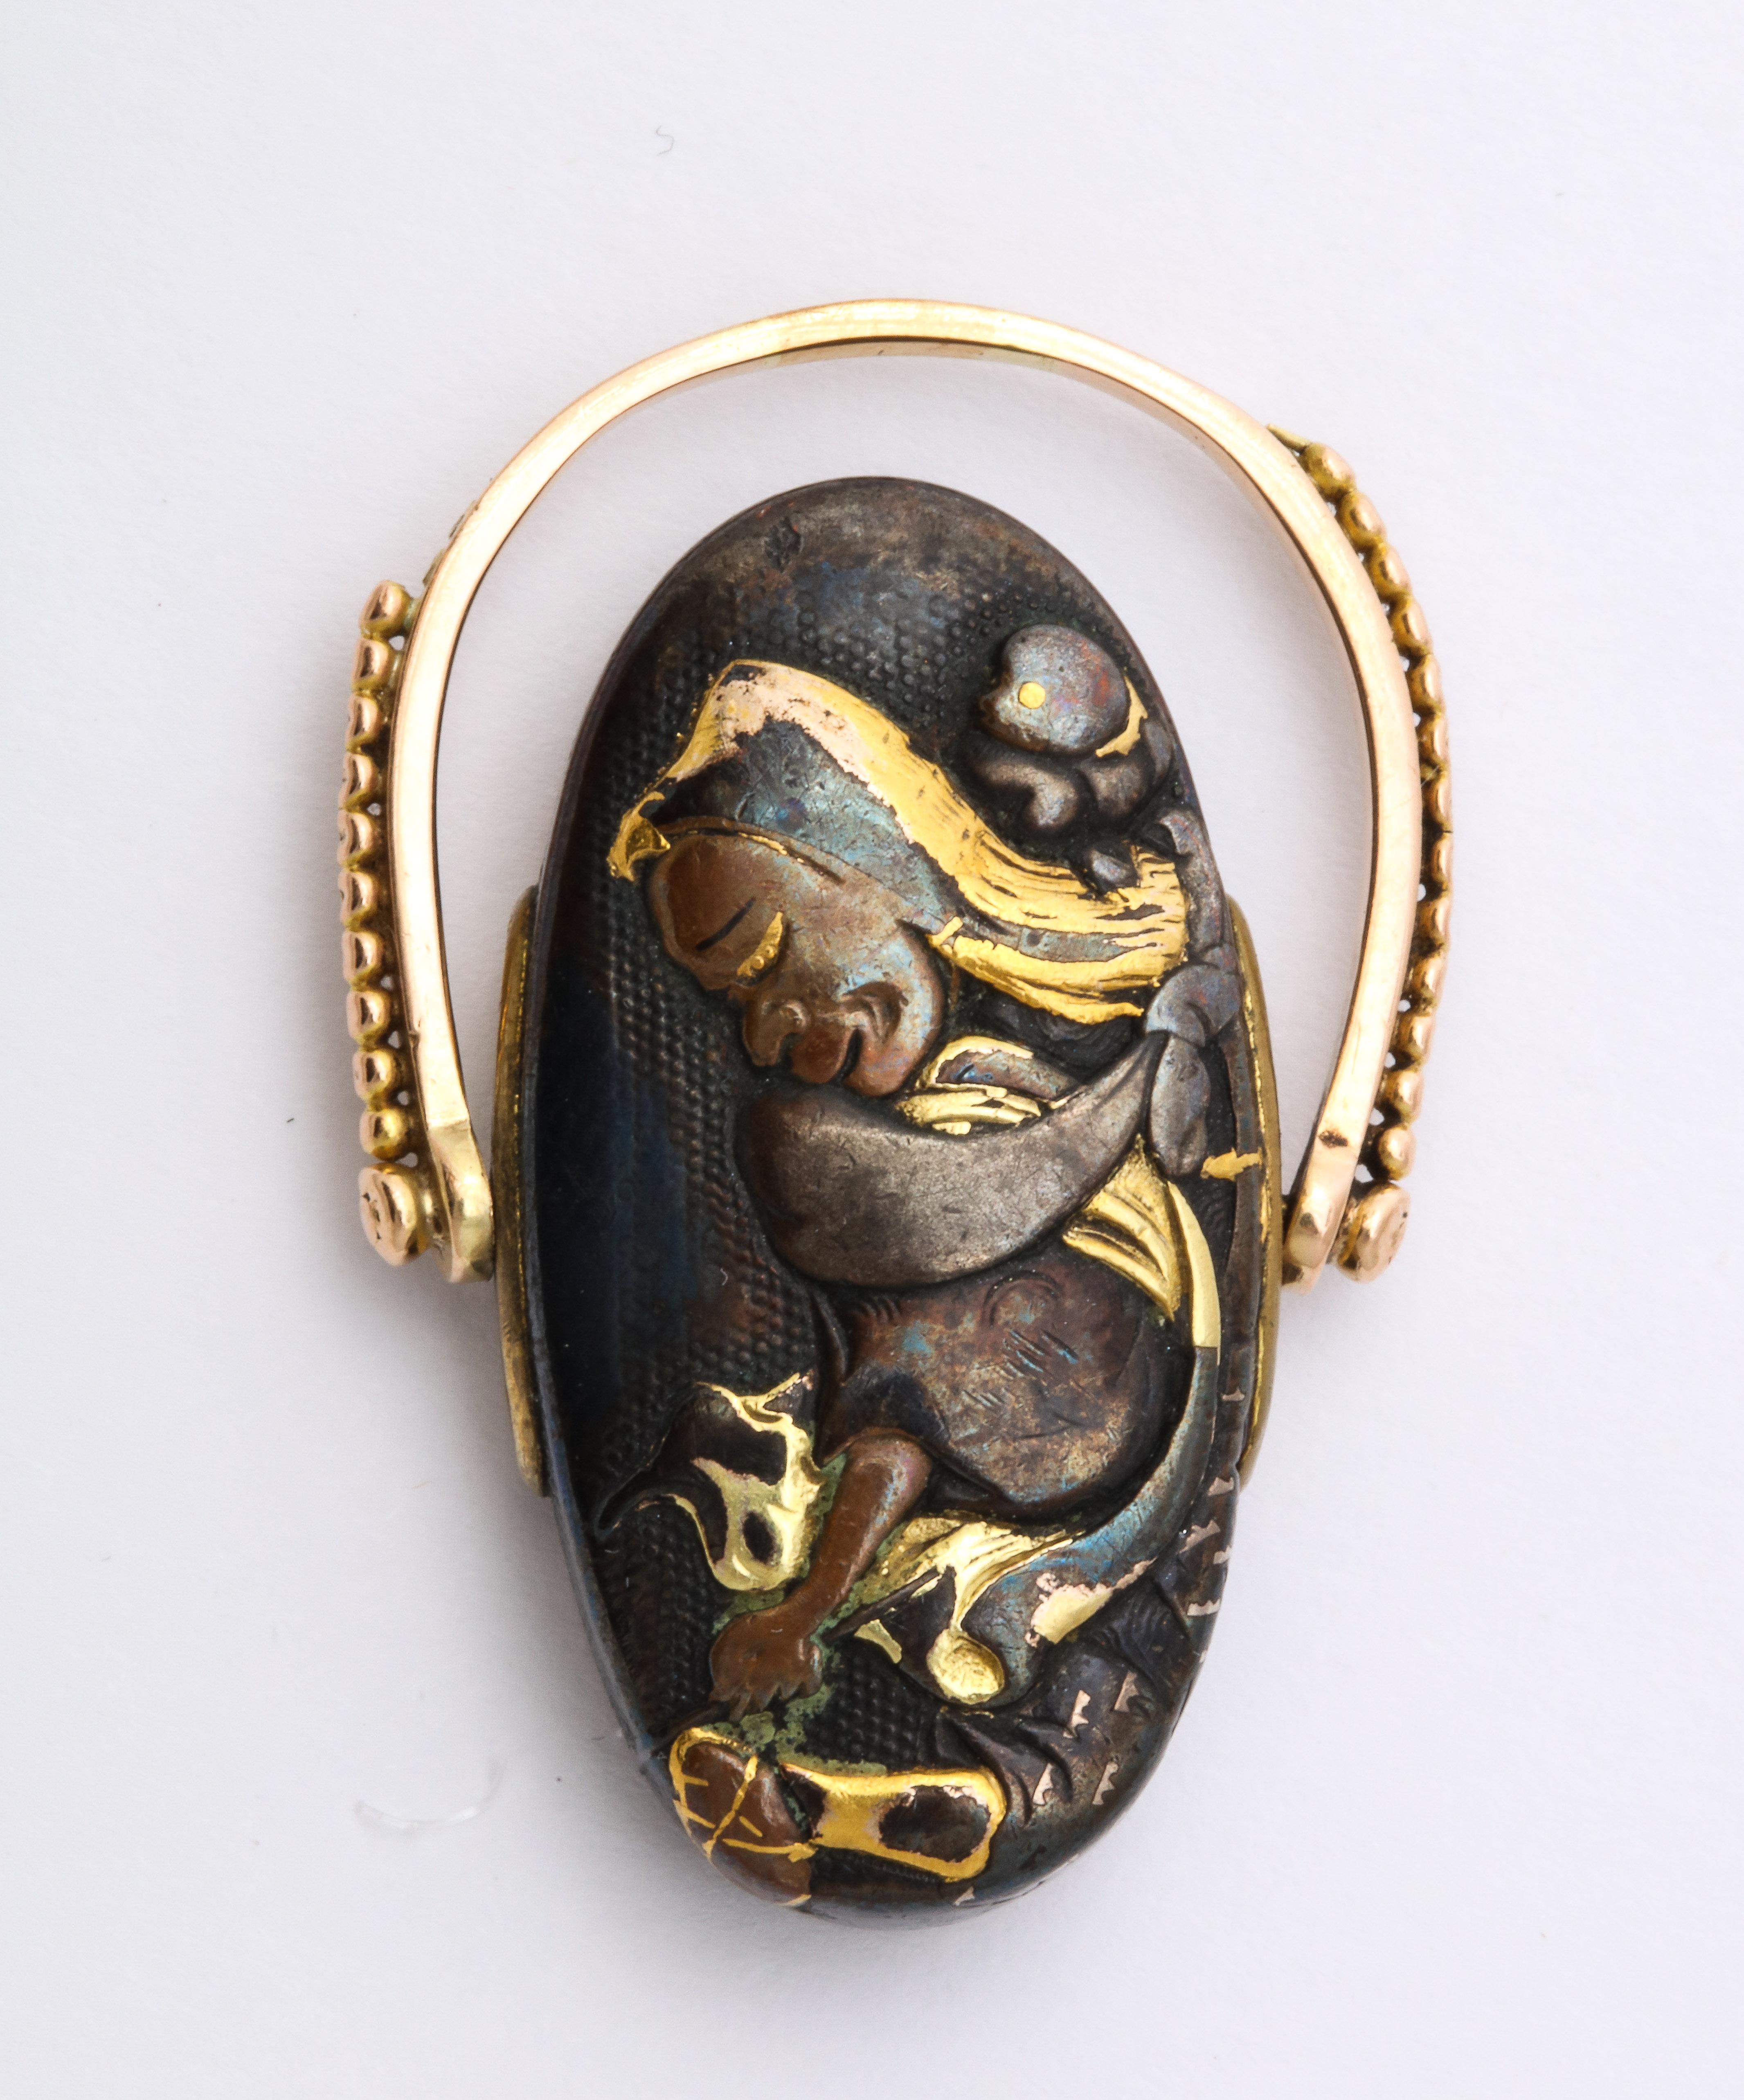 A puppy is wrapped in a golden sash on the back of a kneeling woman on this Shakudo ring c. 1870. It appears that the woman is uncovering a bone from the earth. The sash swirls through the ring like a dance. The reverse of the turning ring is a gold